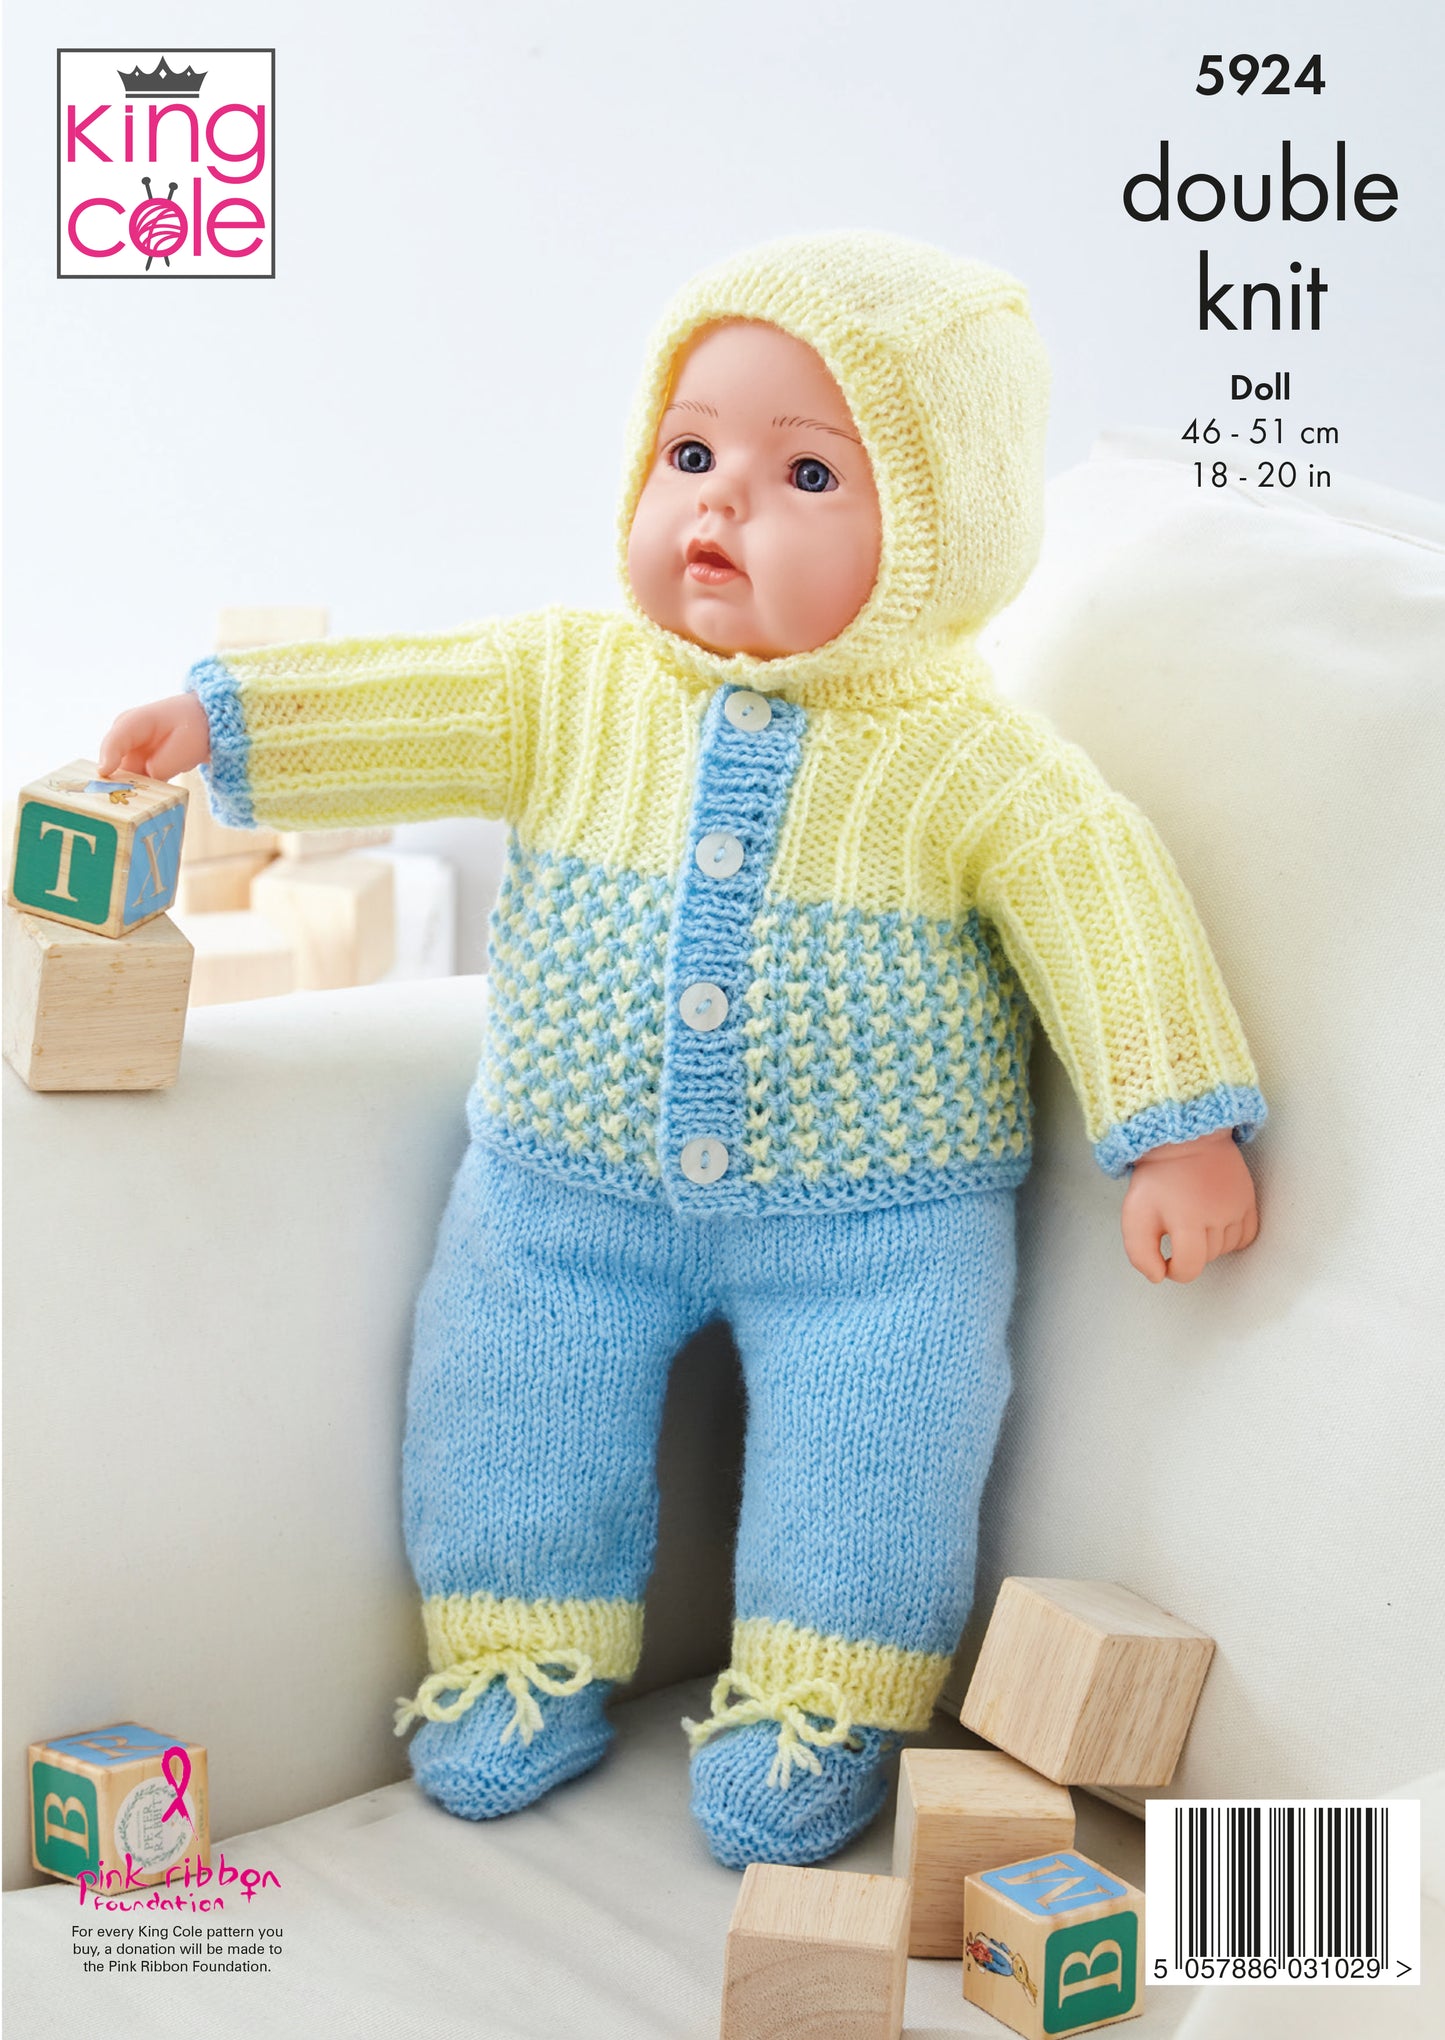 King Cole 5924 DK Dolls Clothes Knitting Pattern